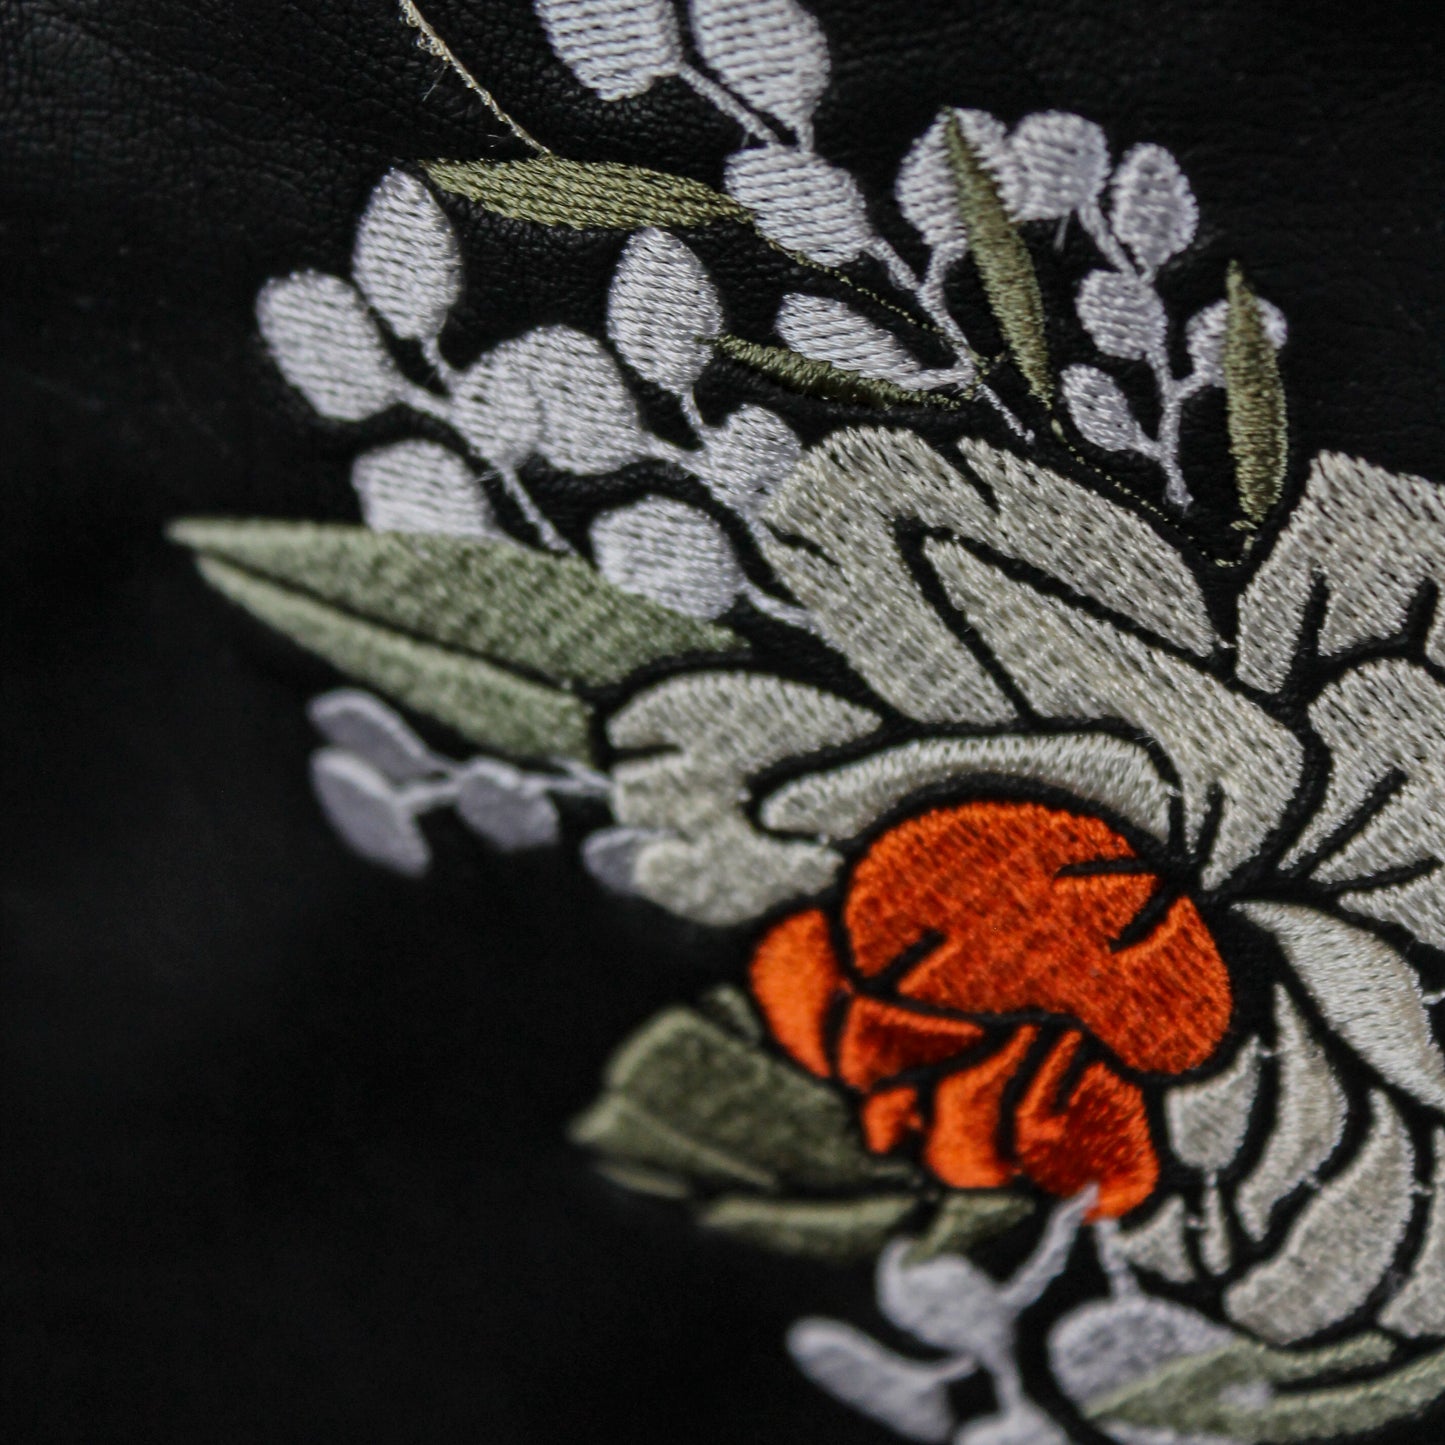 Floral wedding cover-up: Custom embroidered black leather jacket